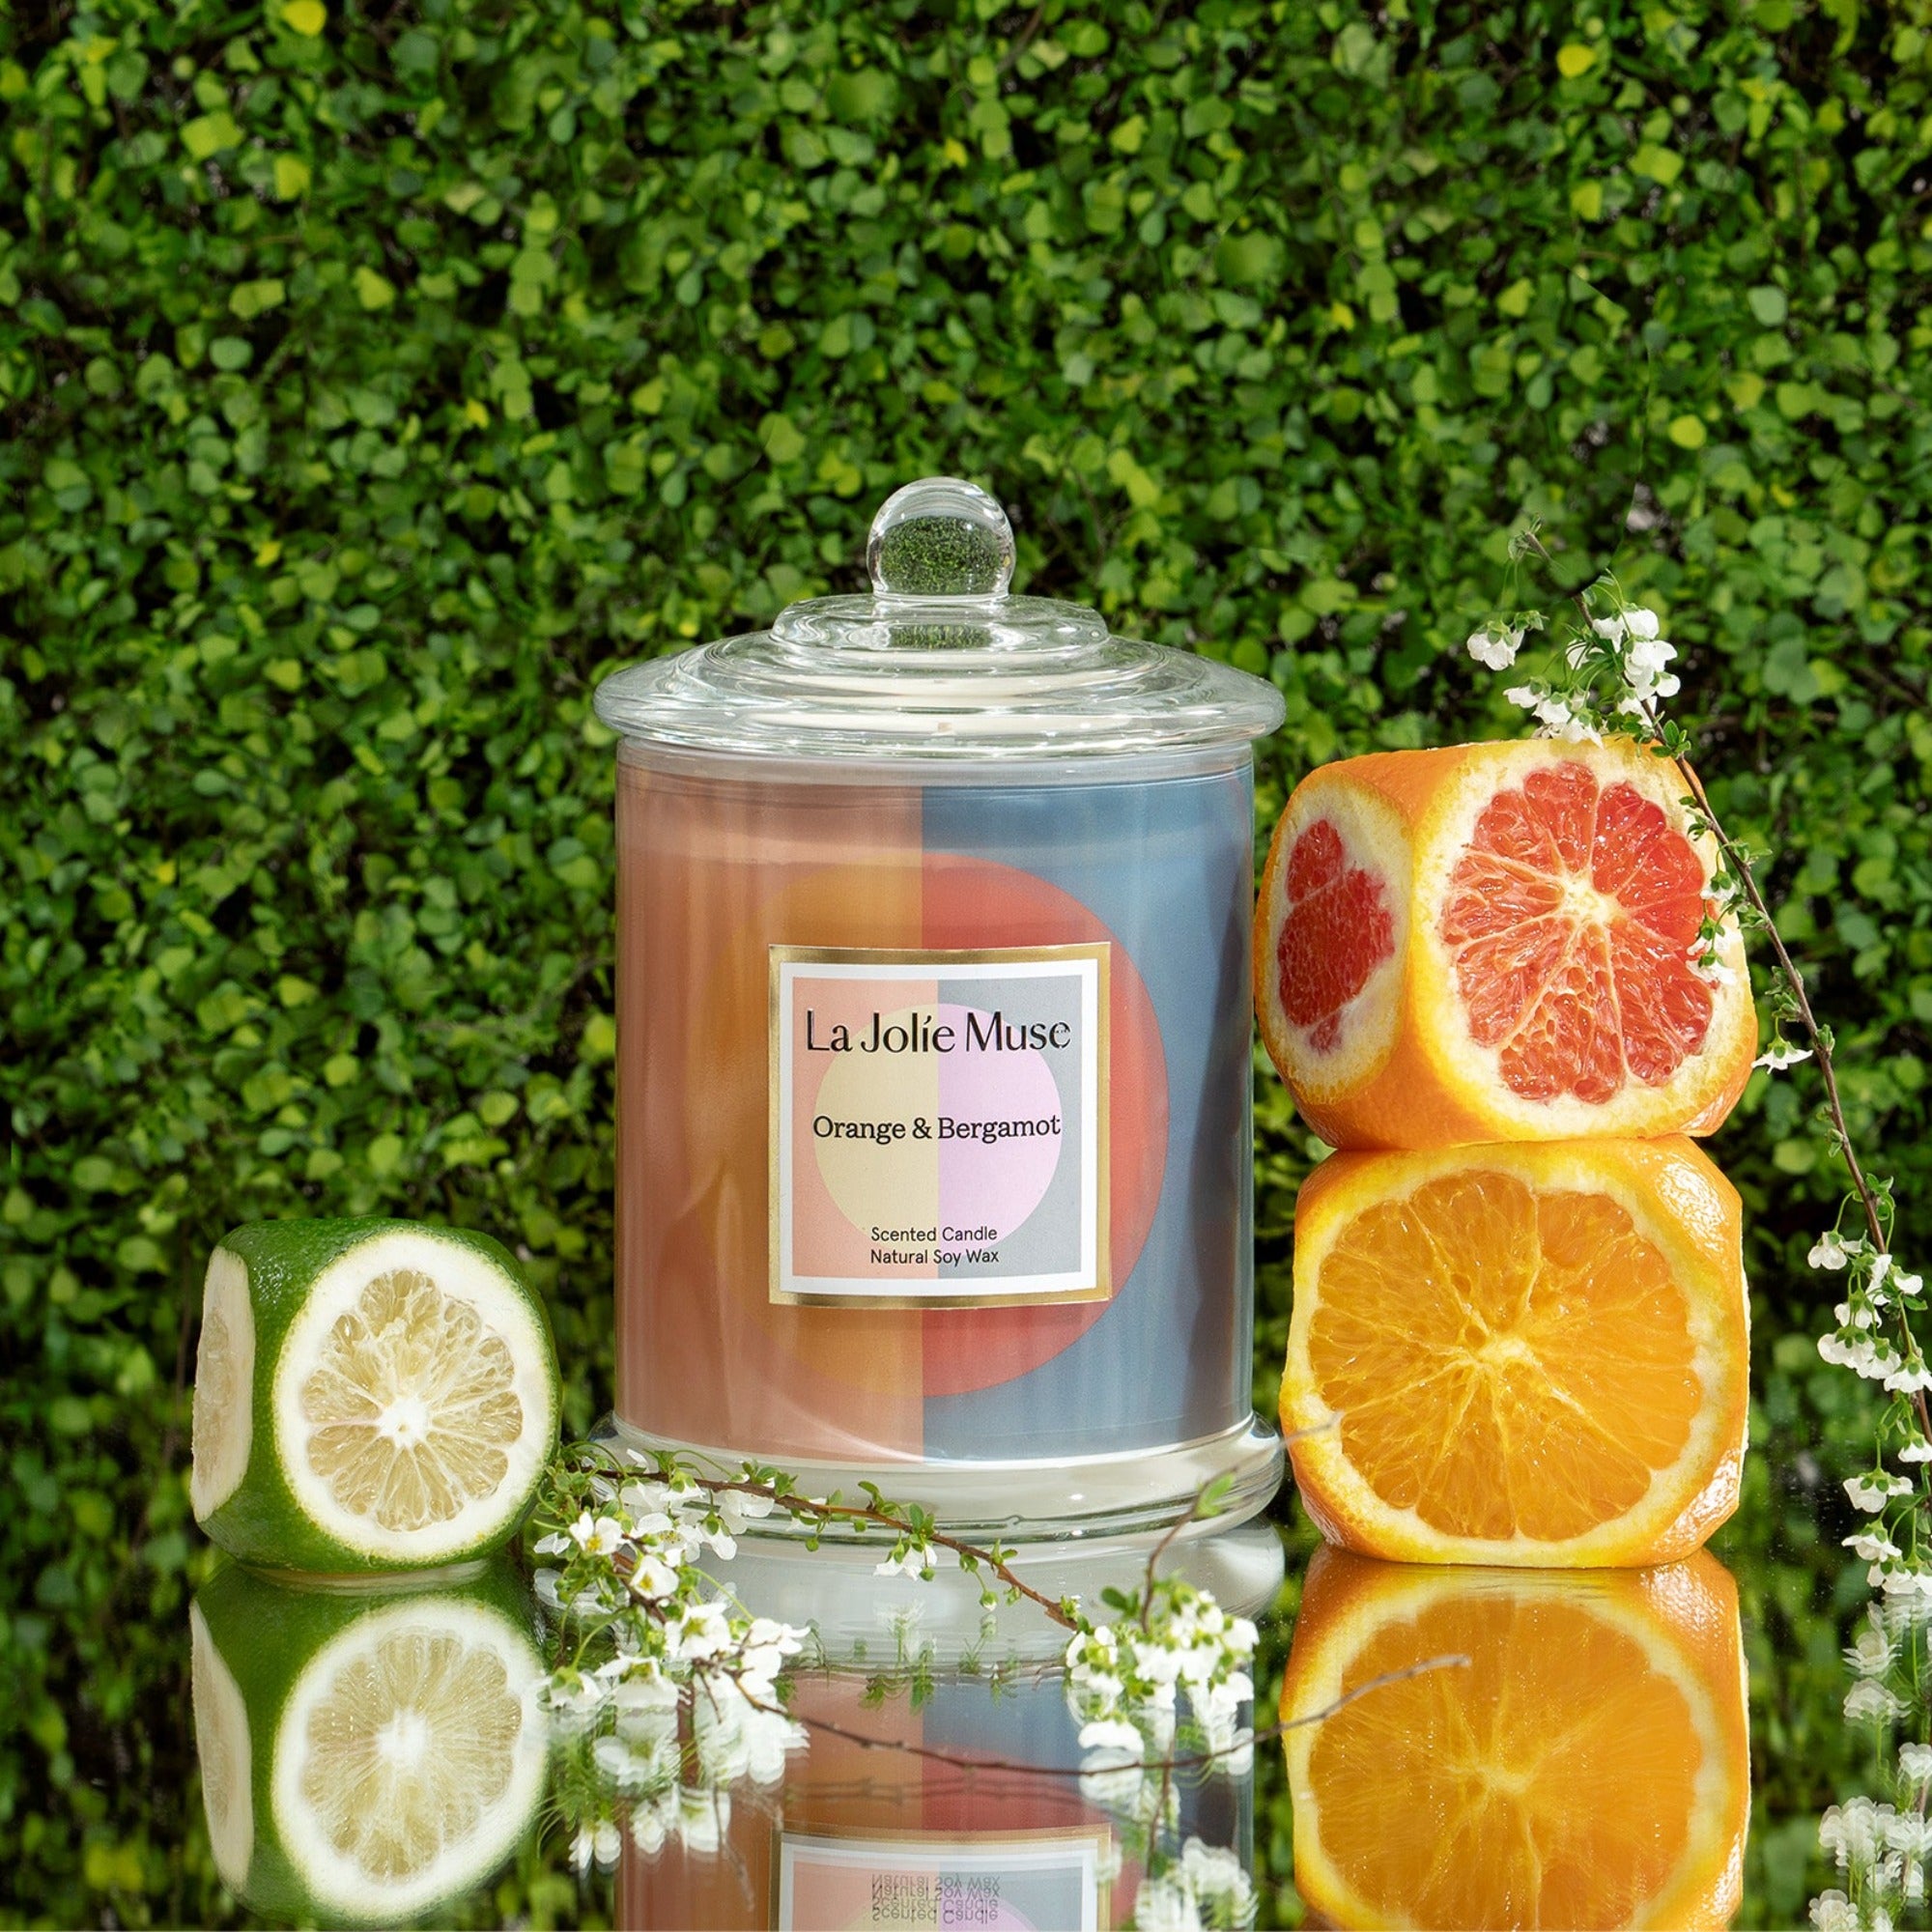 Photo shot of a Roesia - Orange & Bergamot 9.9oz candle placed in the middle, with lime on the left and orange and grapefruit on the right